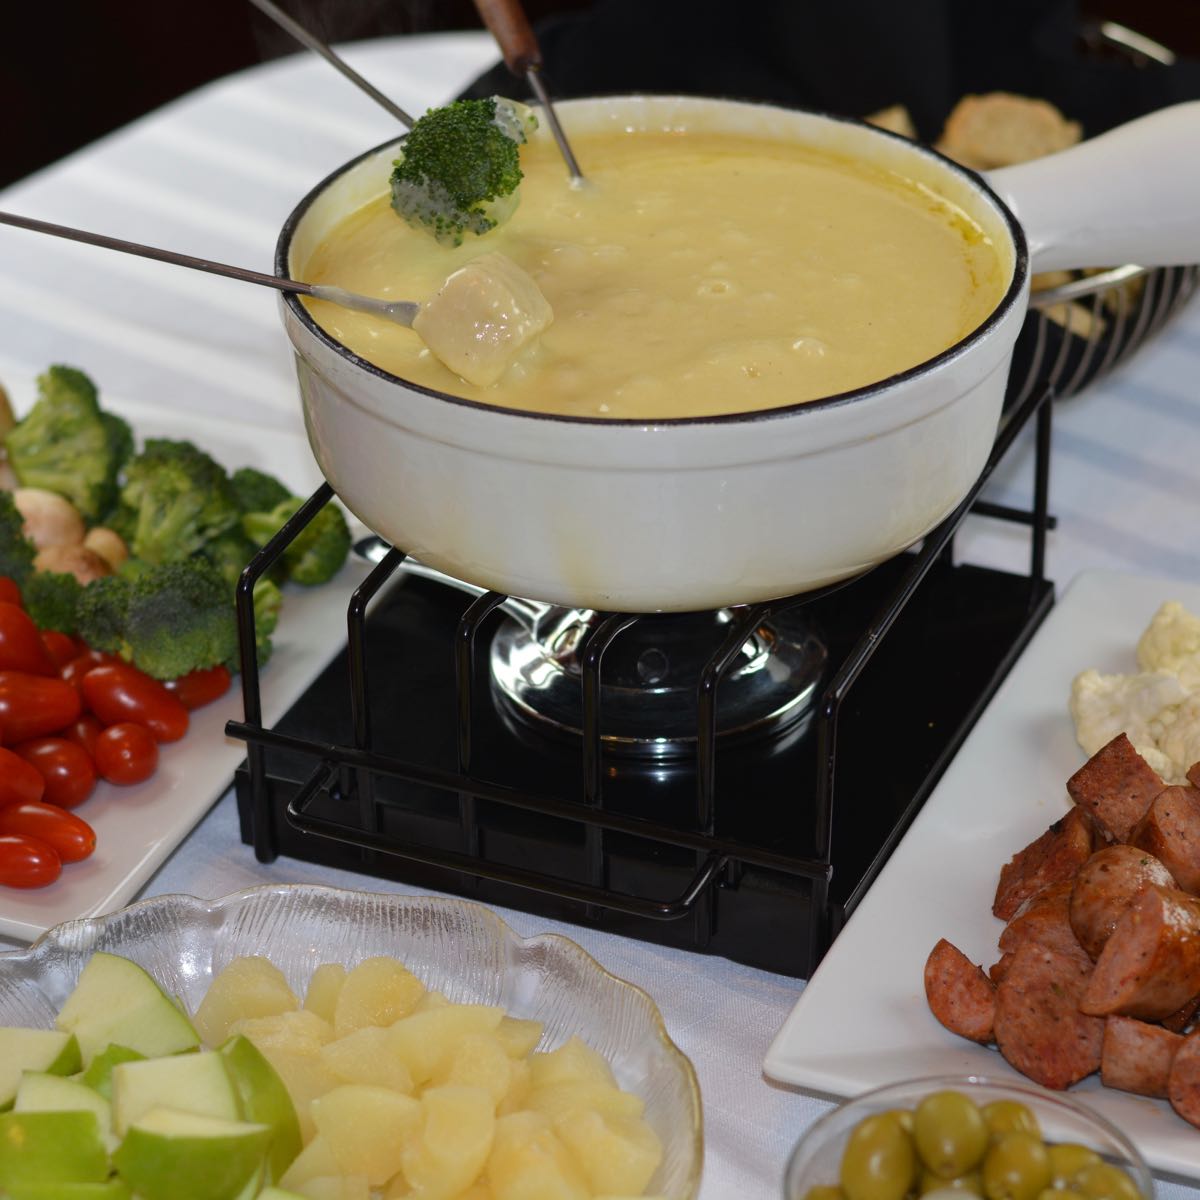 A Cheese Fondue pot surrounded by gluten free foods for dipping.